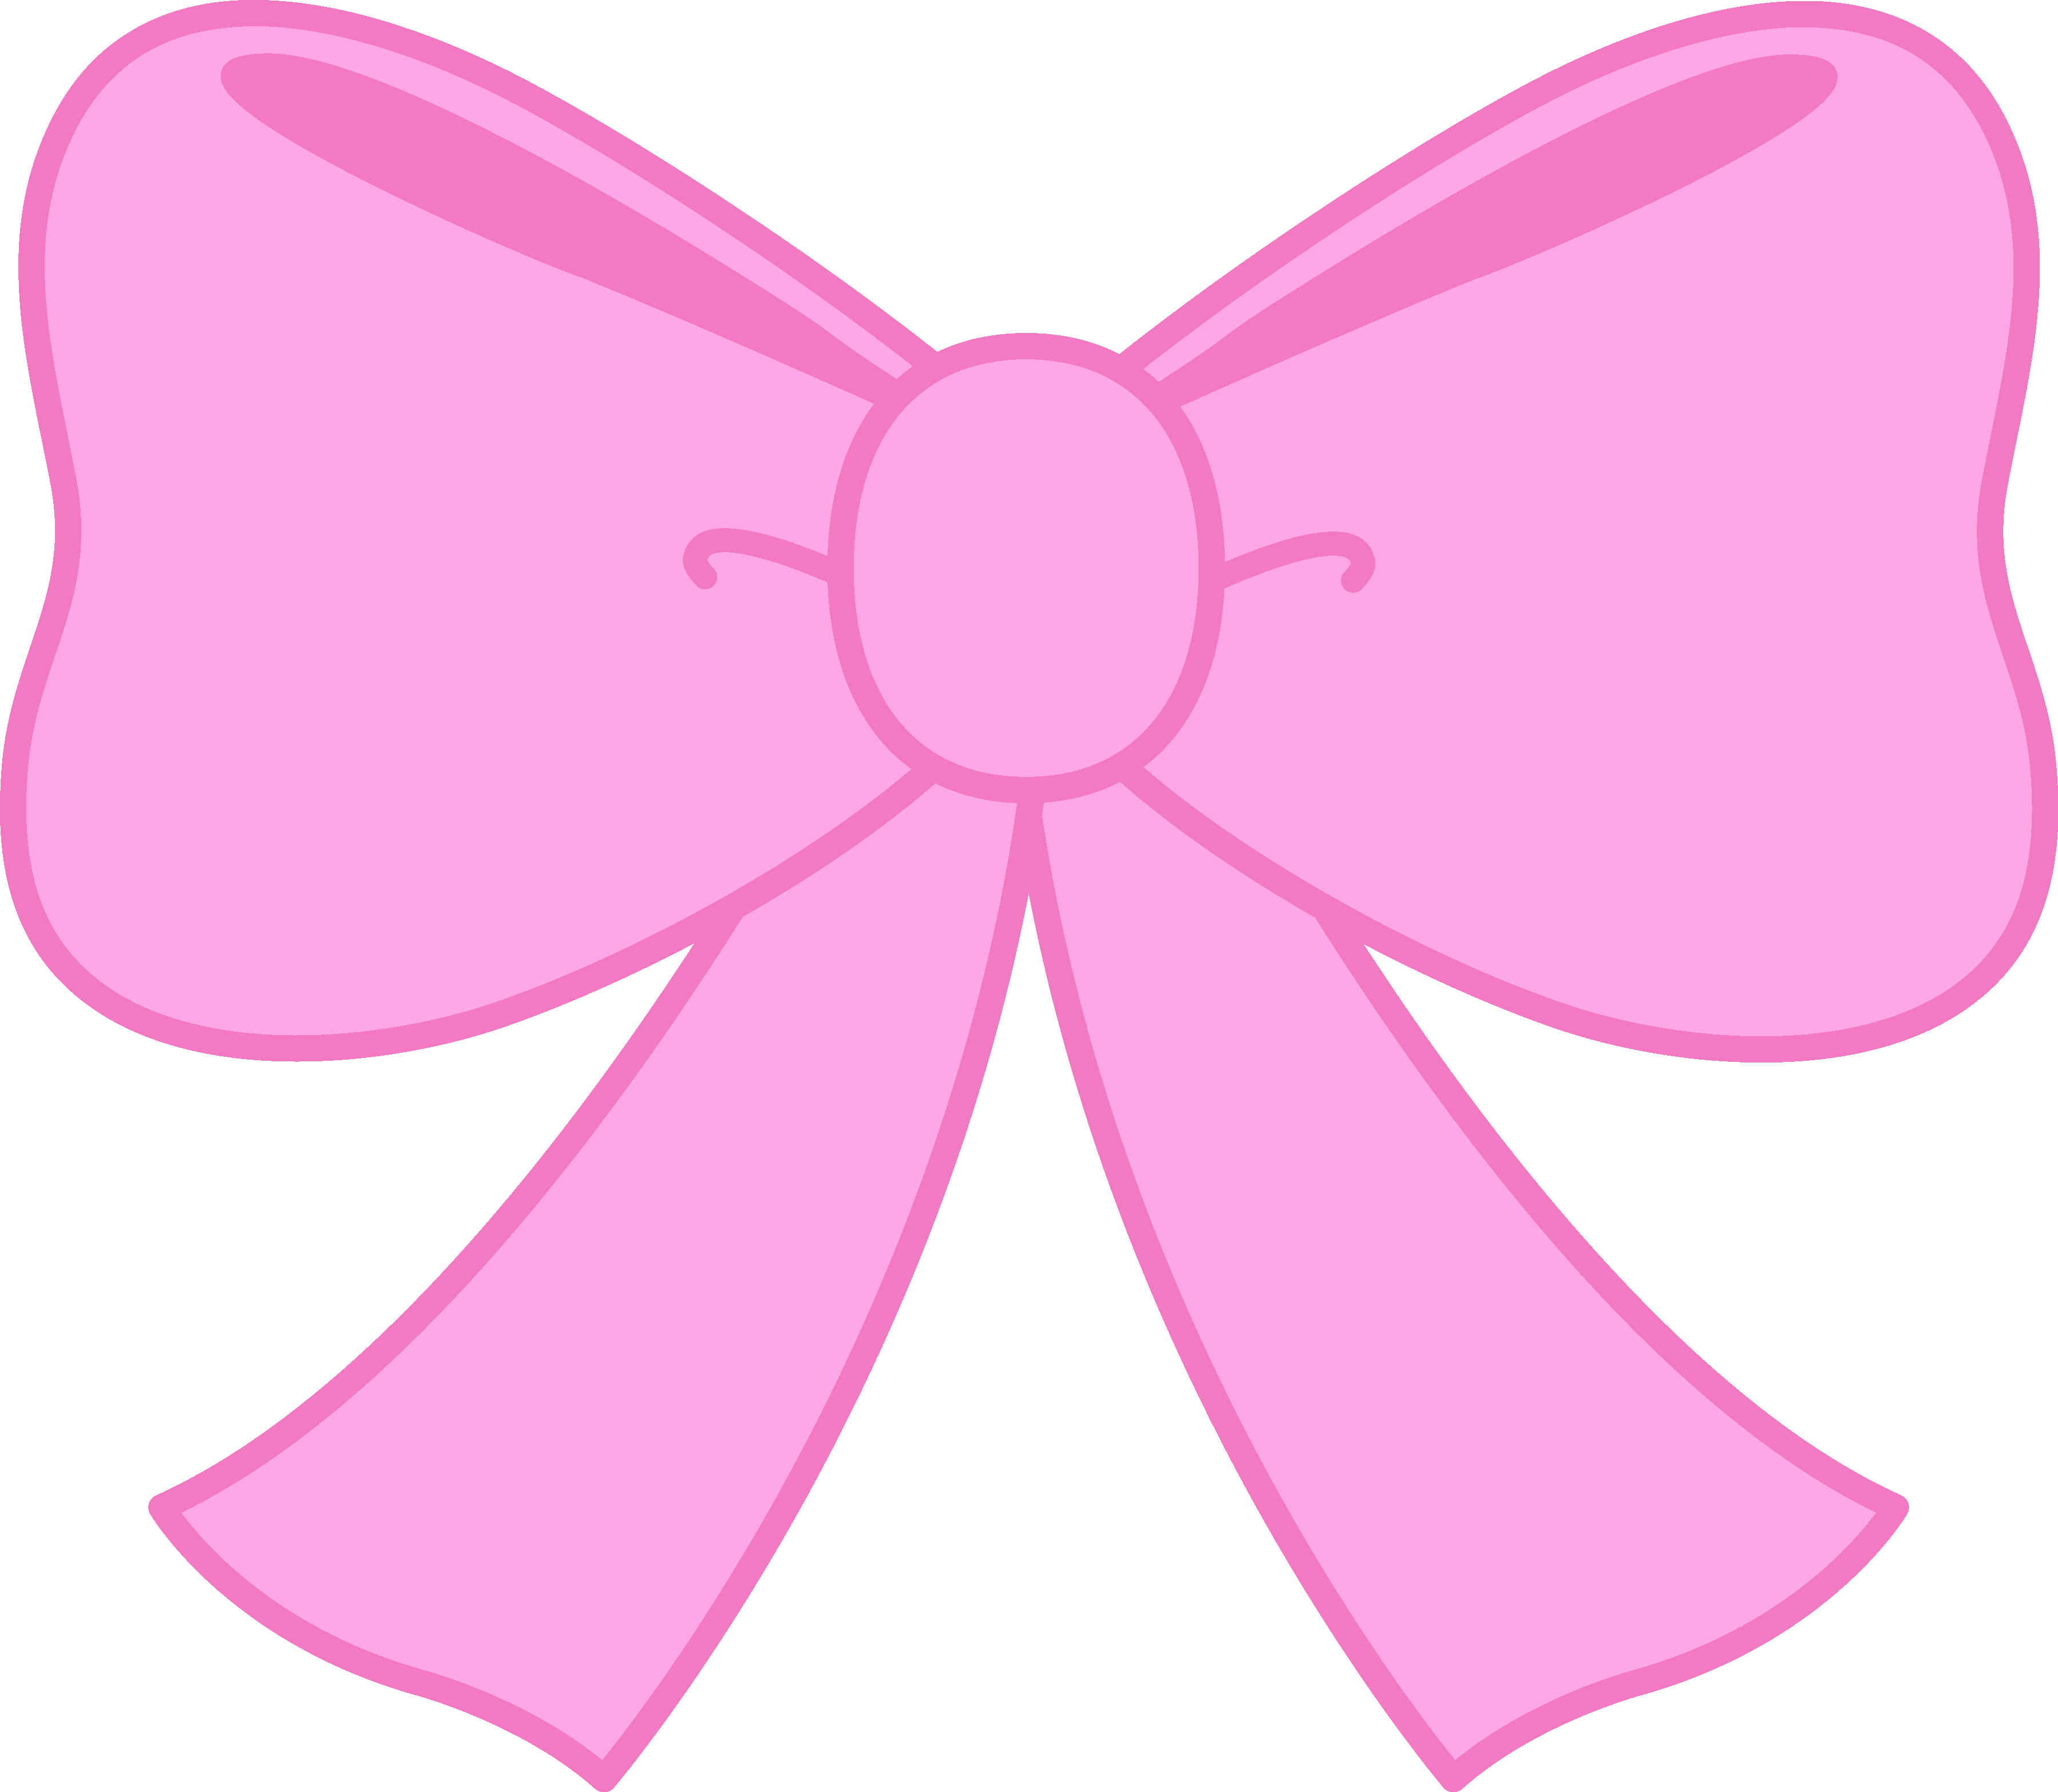 Image of Bows Clipart Bow .